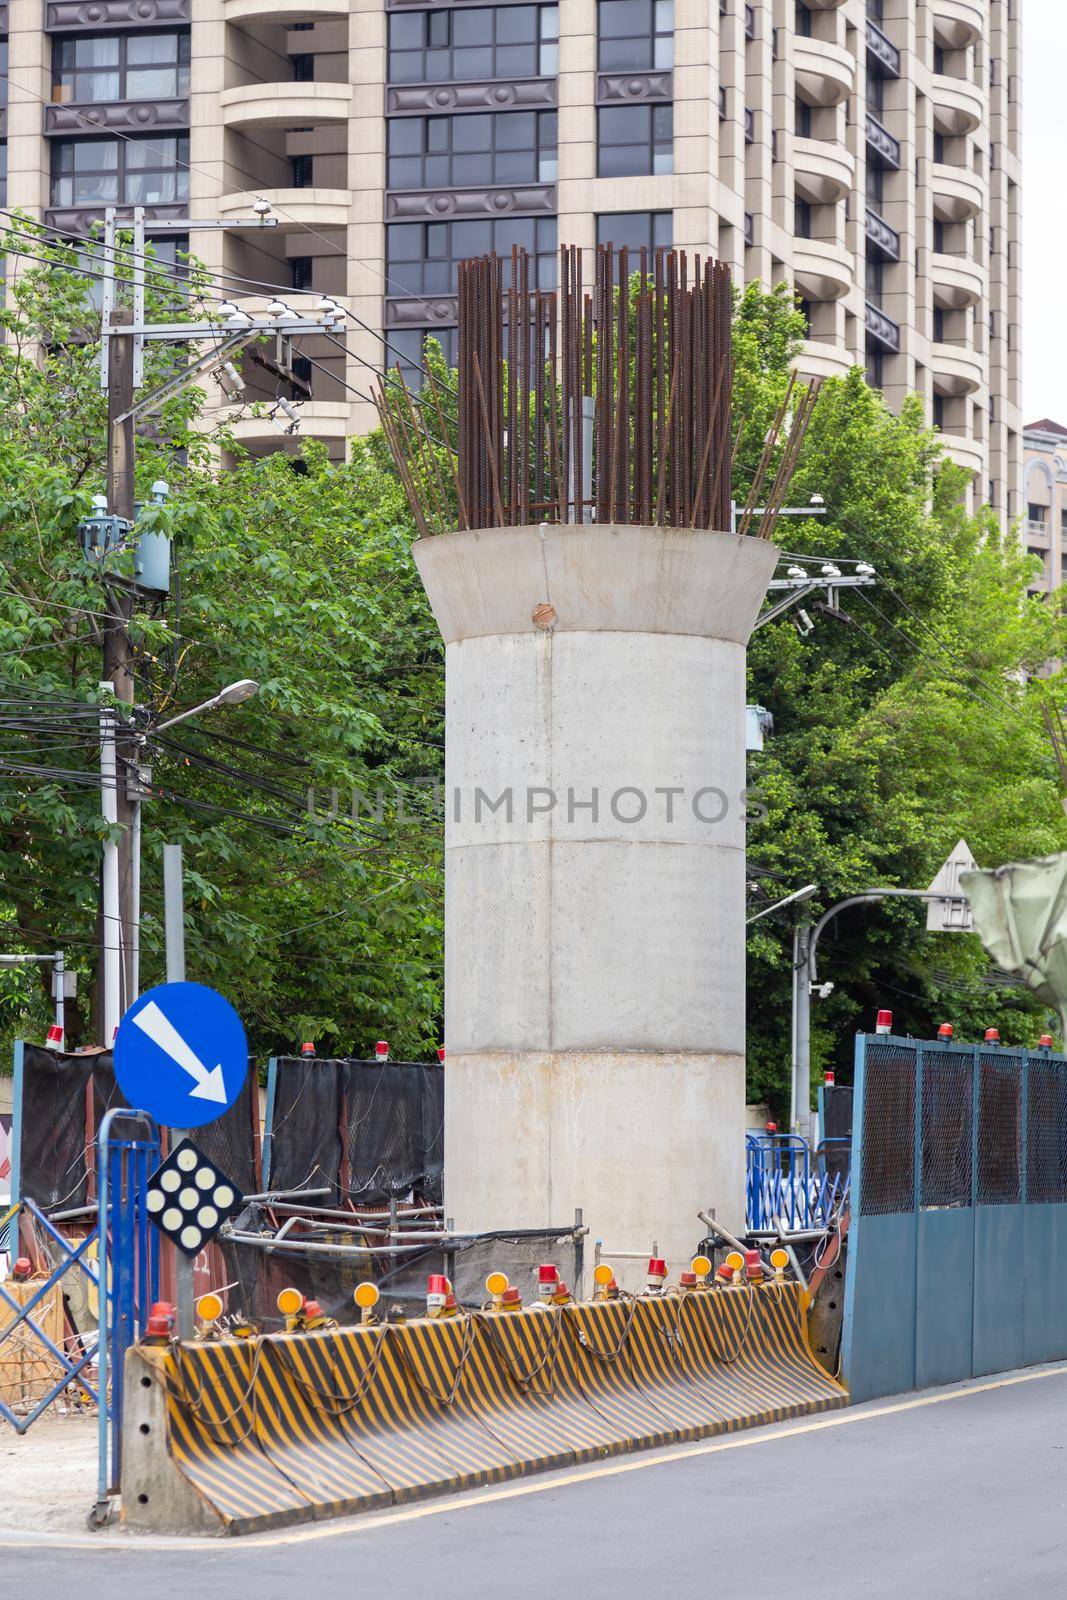 Pillars being erected as part of construction for metro system. by imagesbykenny